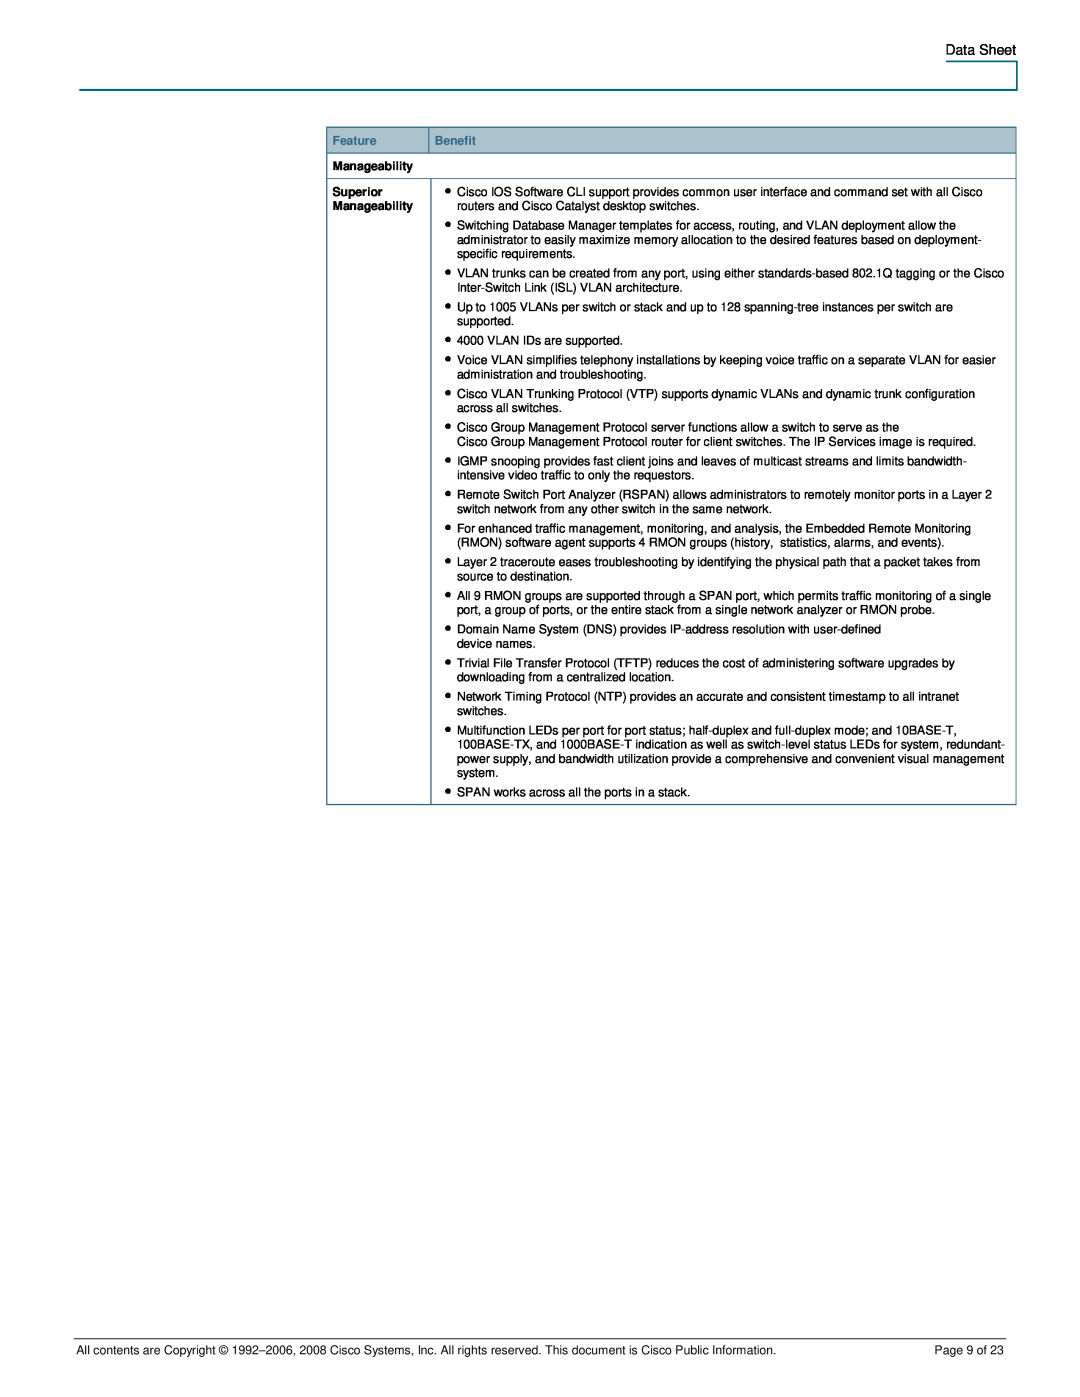 Cisco Systems 3750-48PS, 3750-24PS manual Feature, Benefit, Superior Manageability, Page 9 of 